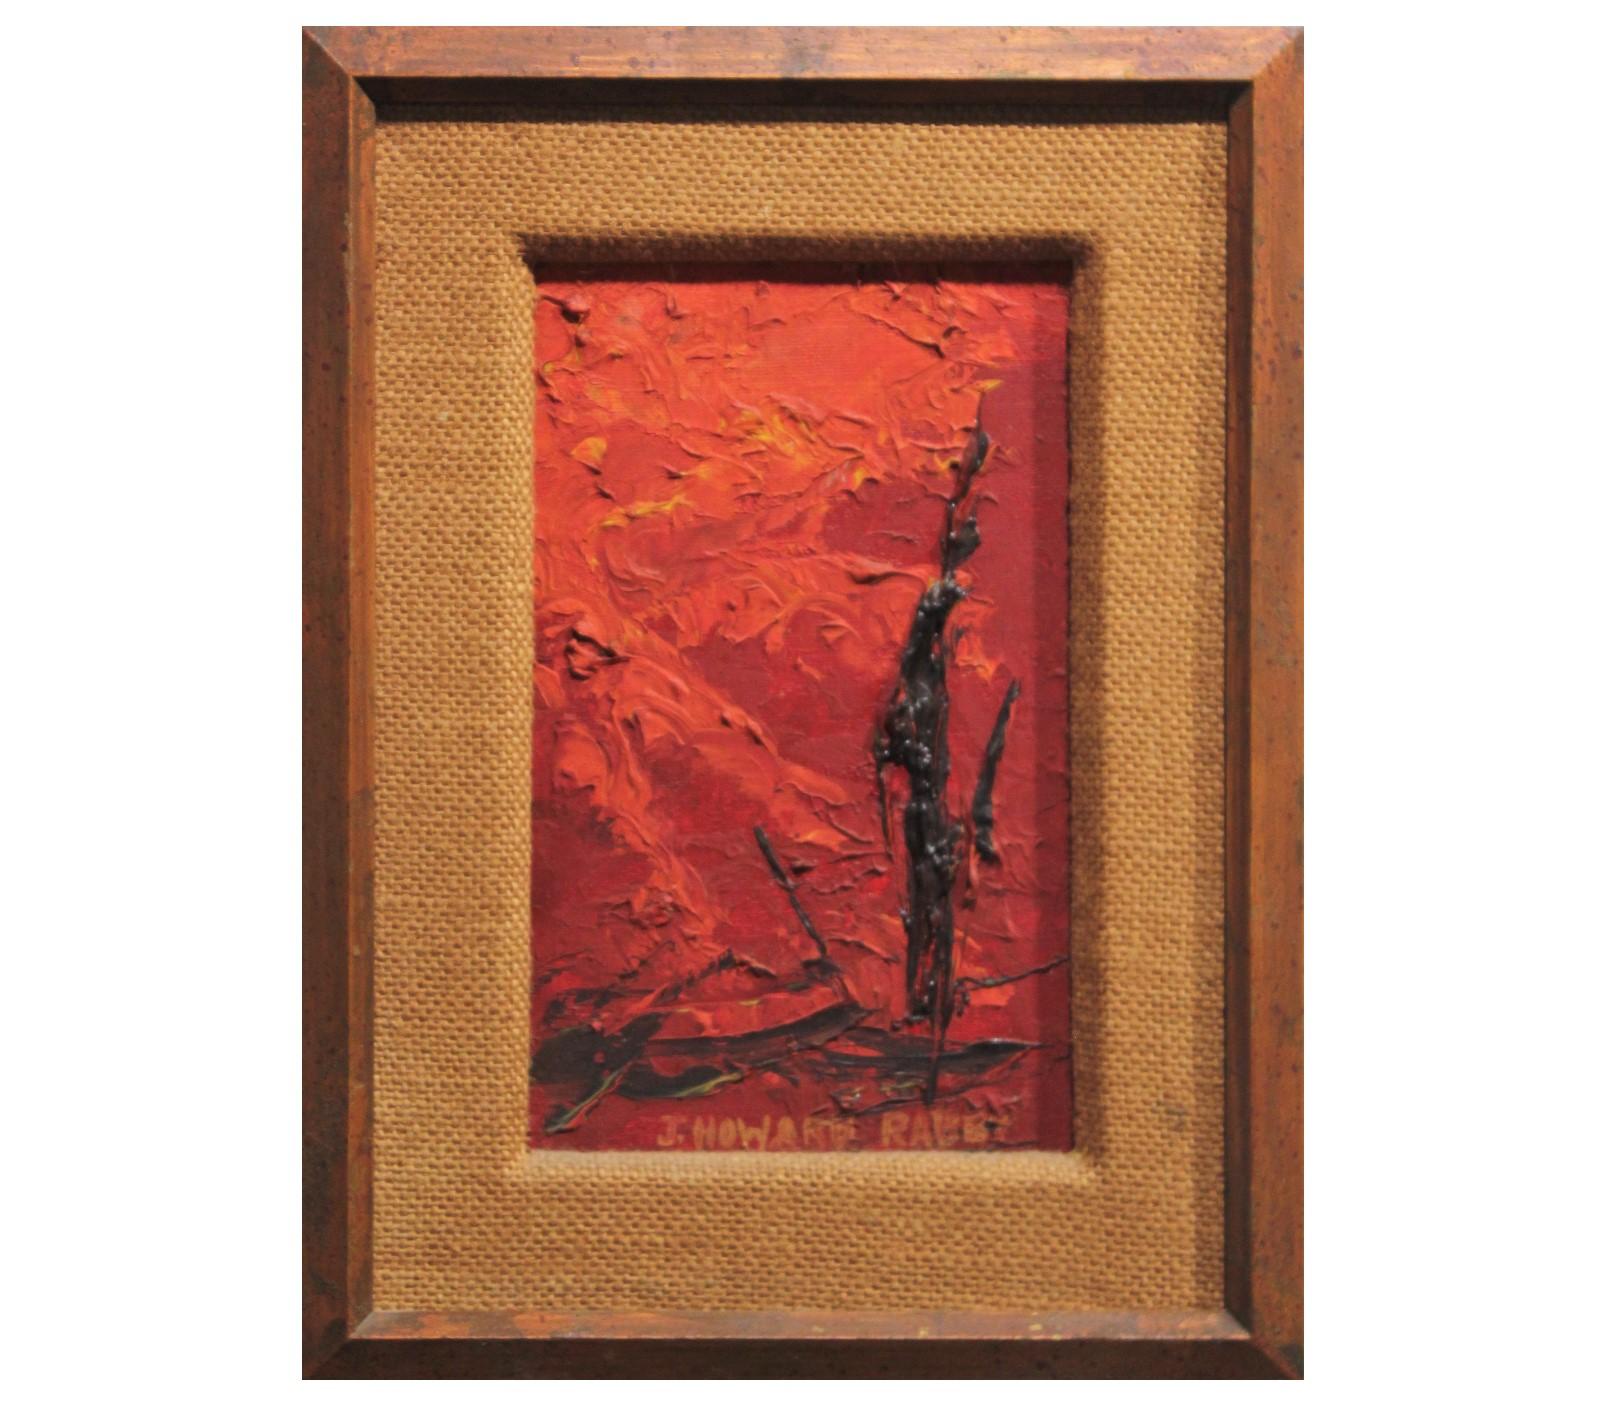 Jim Rabby Abstract Painting - "Cast of the Sun" Early Small Abstract Textured Painting